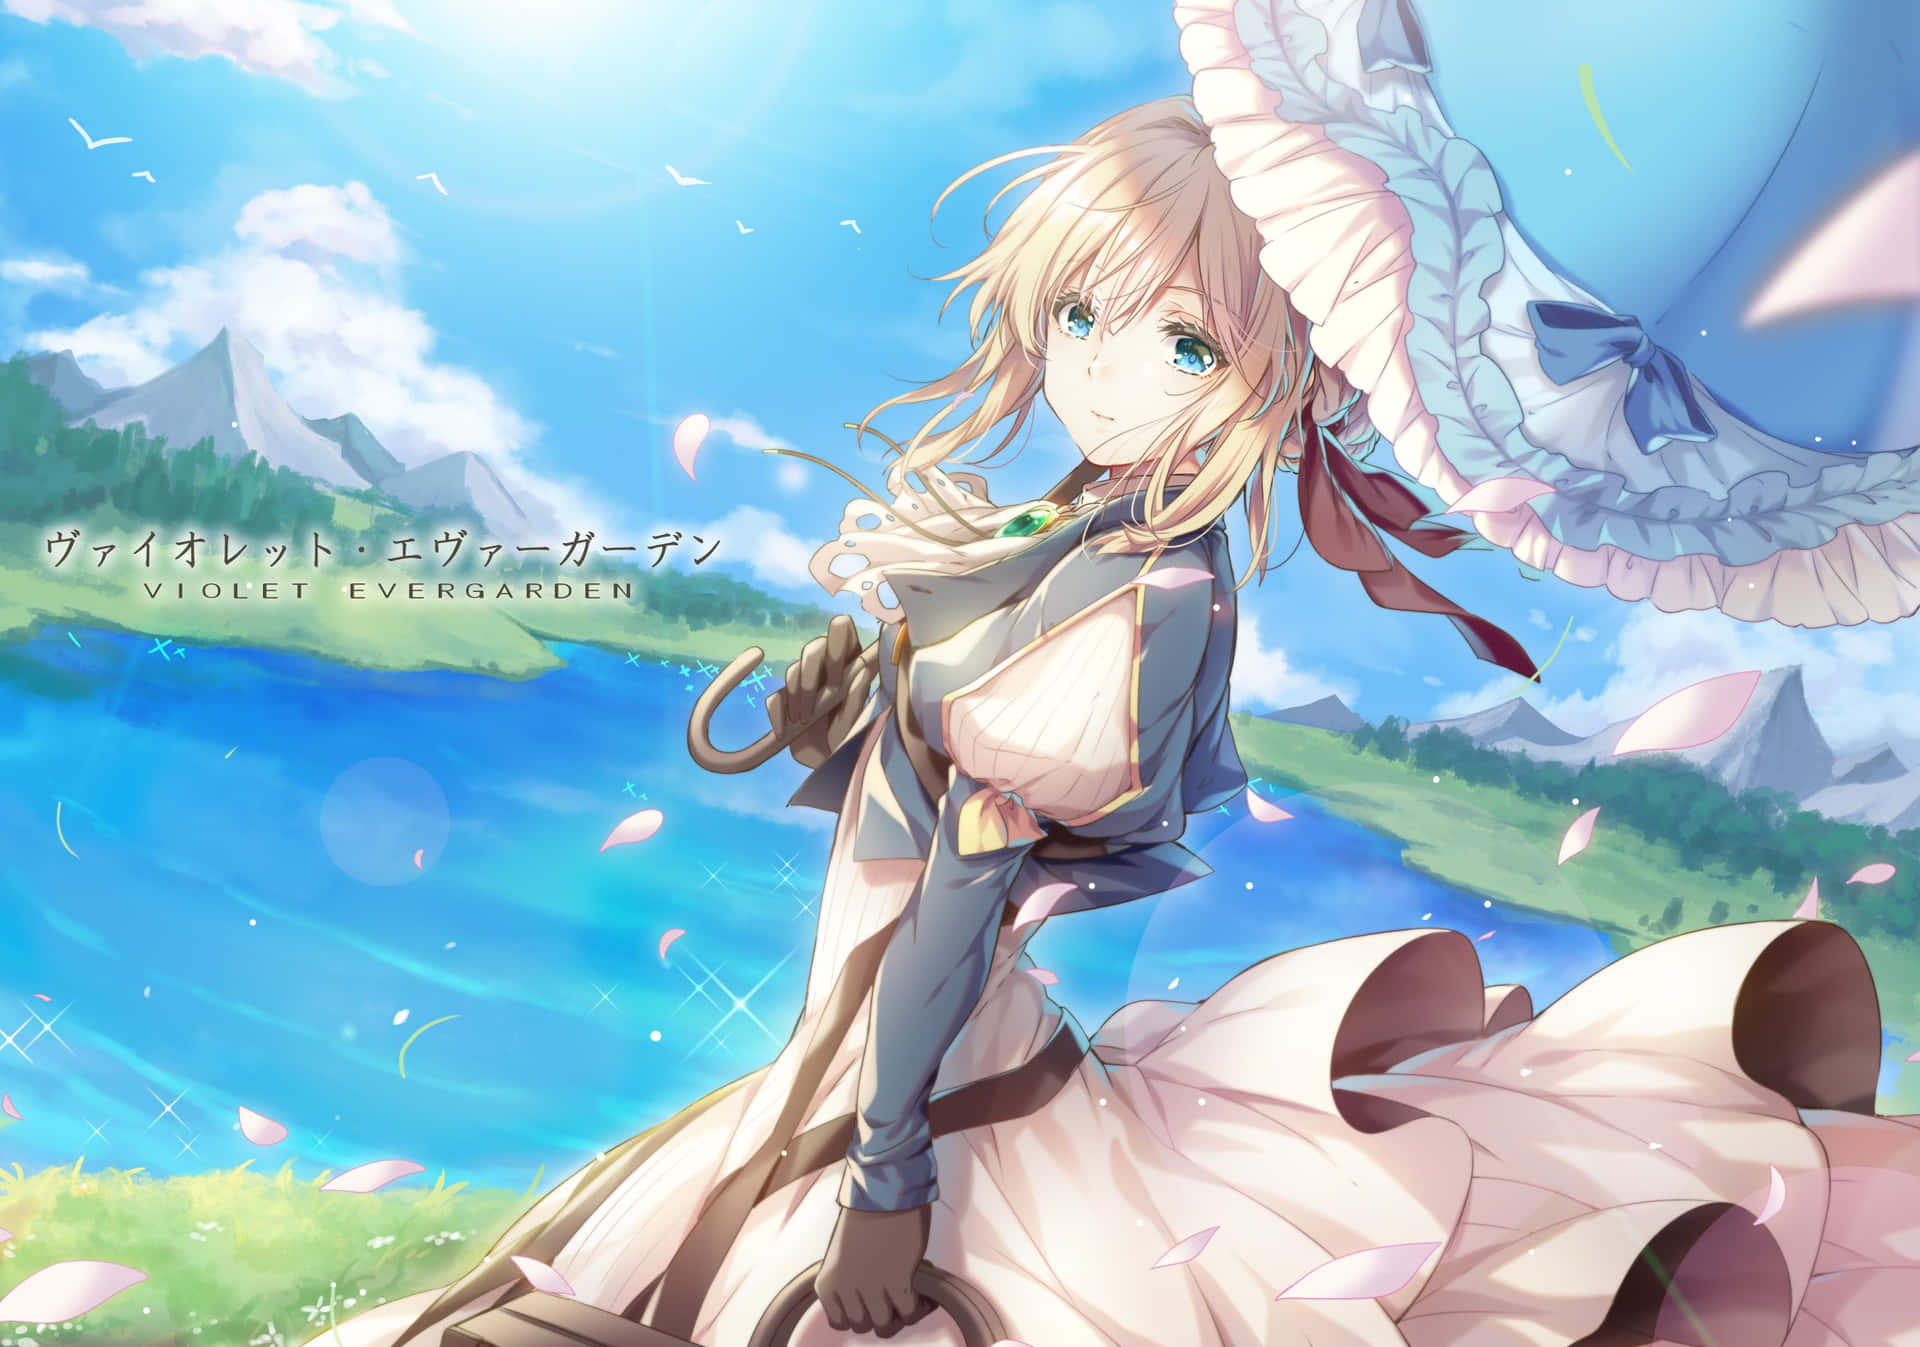 Violet Evergarden, the Auto Memory Doll living in the world of letters